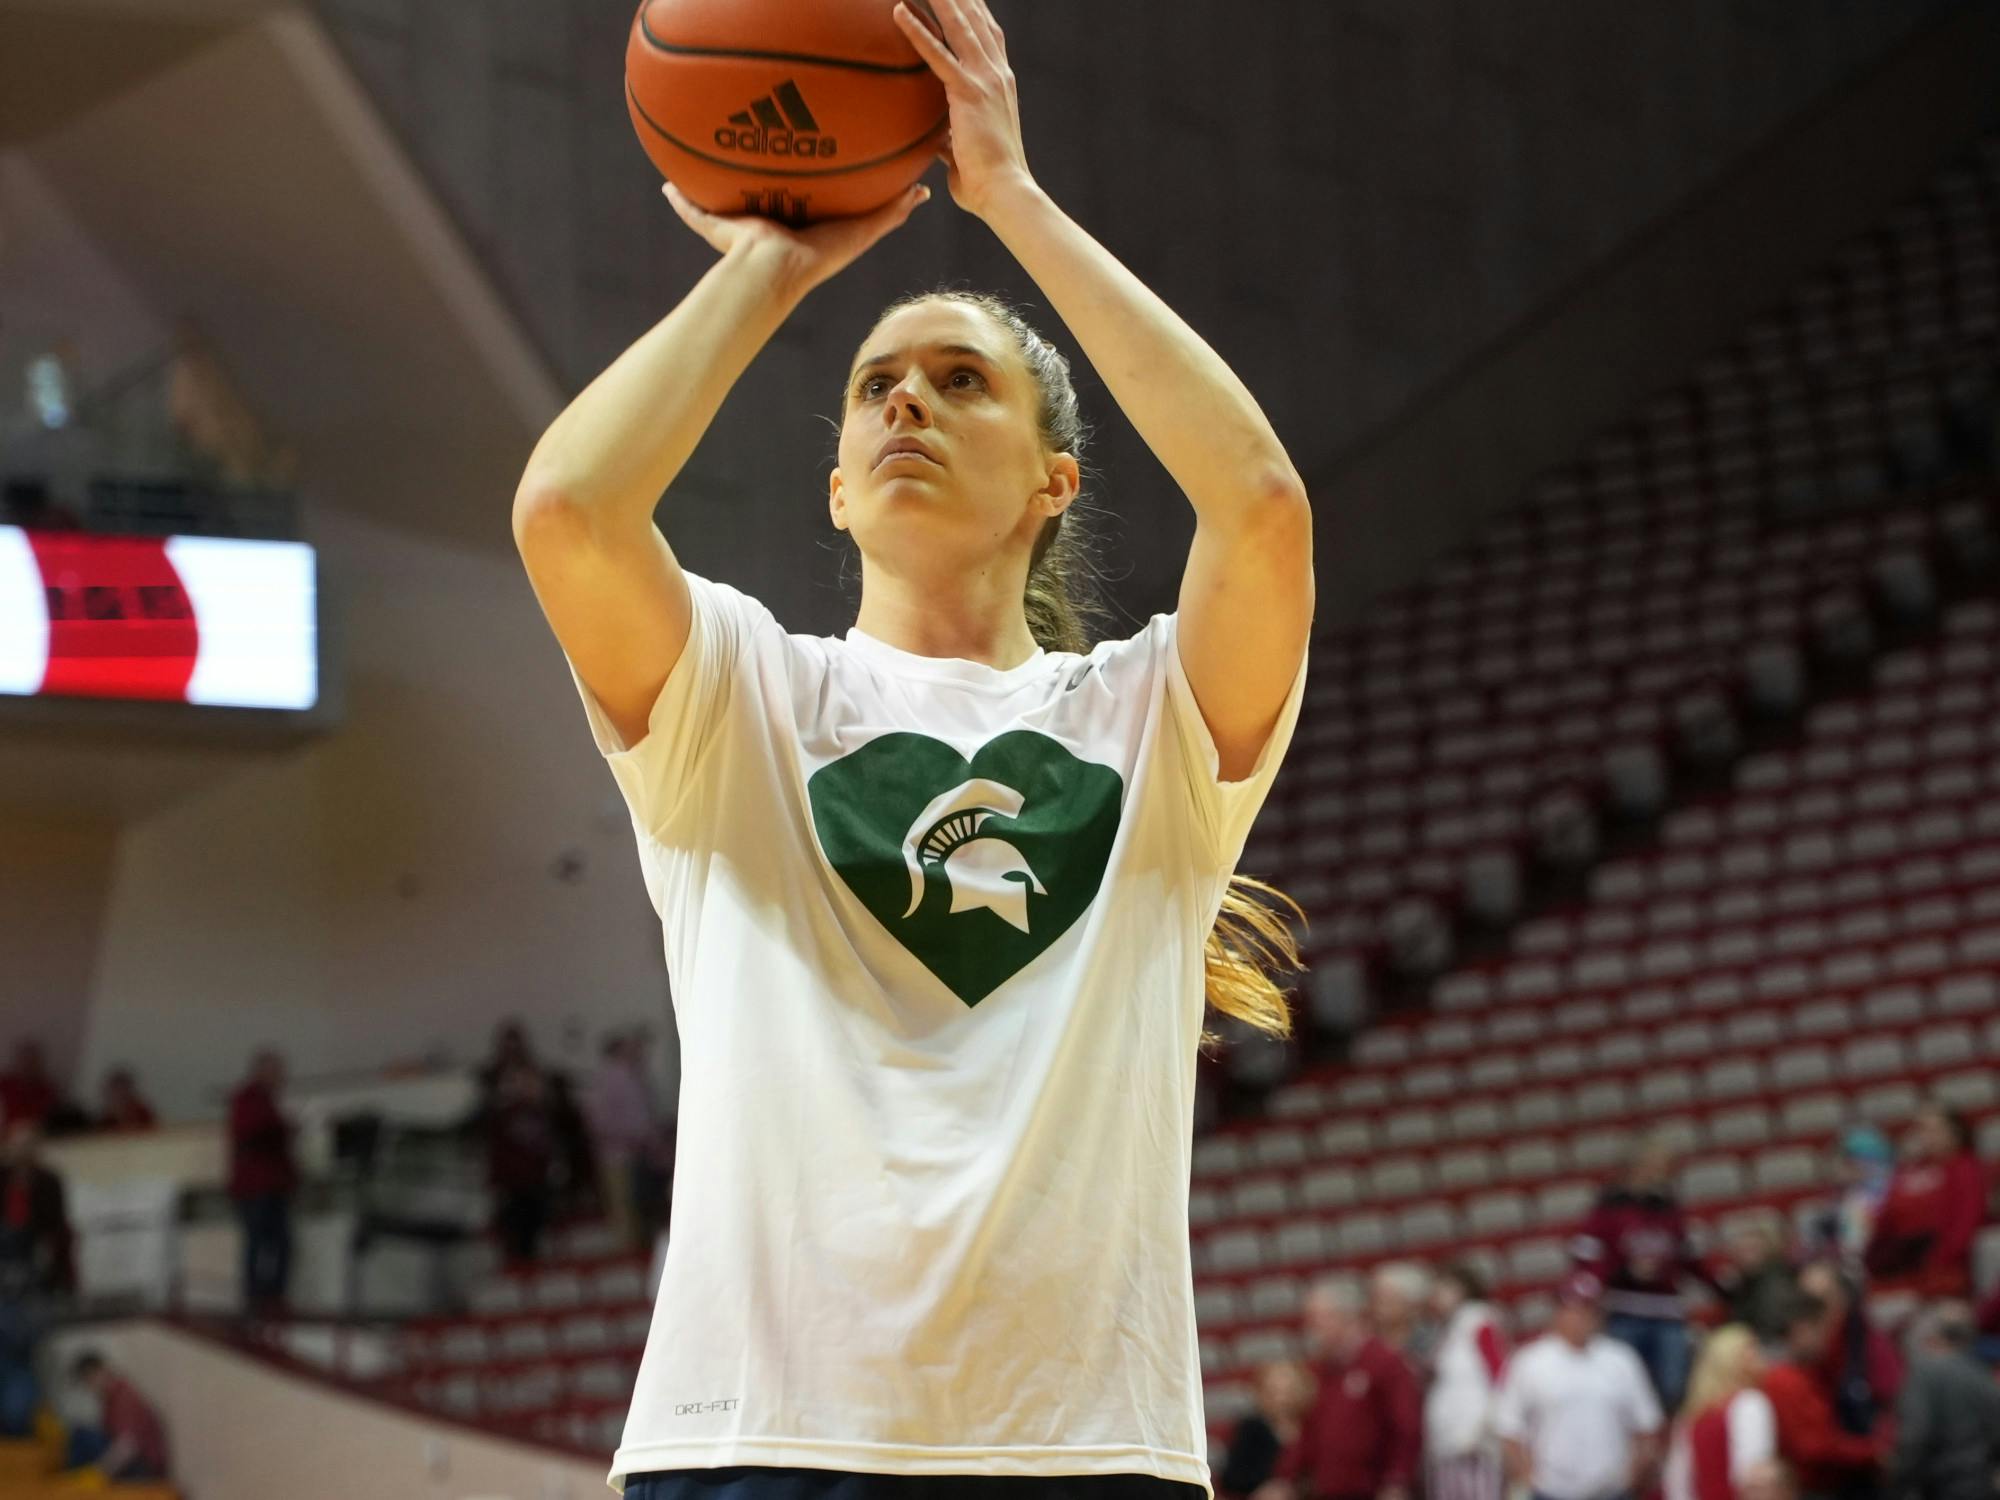 <p>University of Michigan graduate forward Emily Kiser dawns the team's specialty warm-ups, showing support for Michigan State after the mass shooting on the University's campus on Monday, Feb. 13, 2023. Courtesy of University of Michigan Athletics.</p>